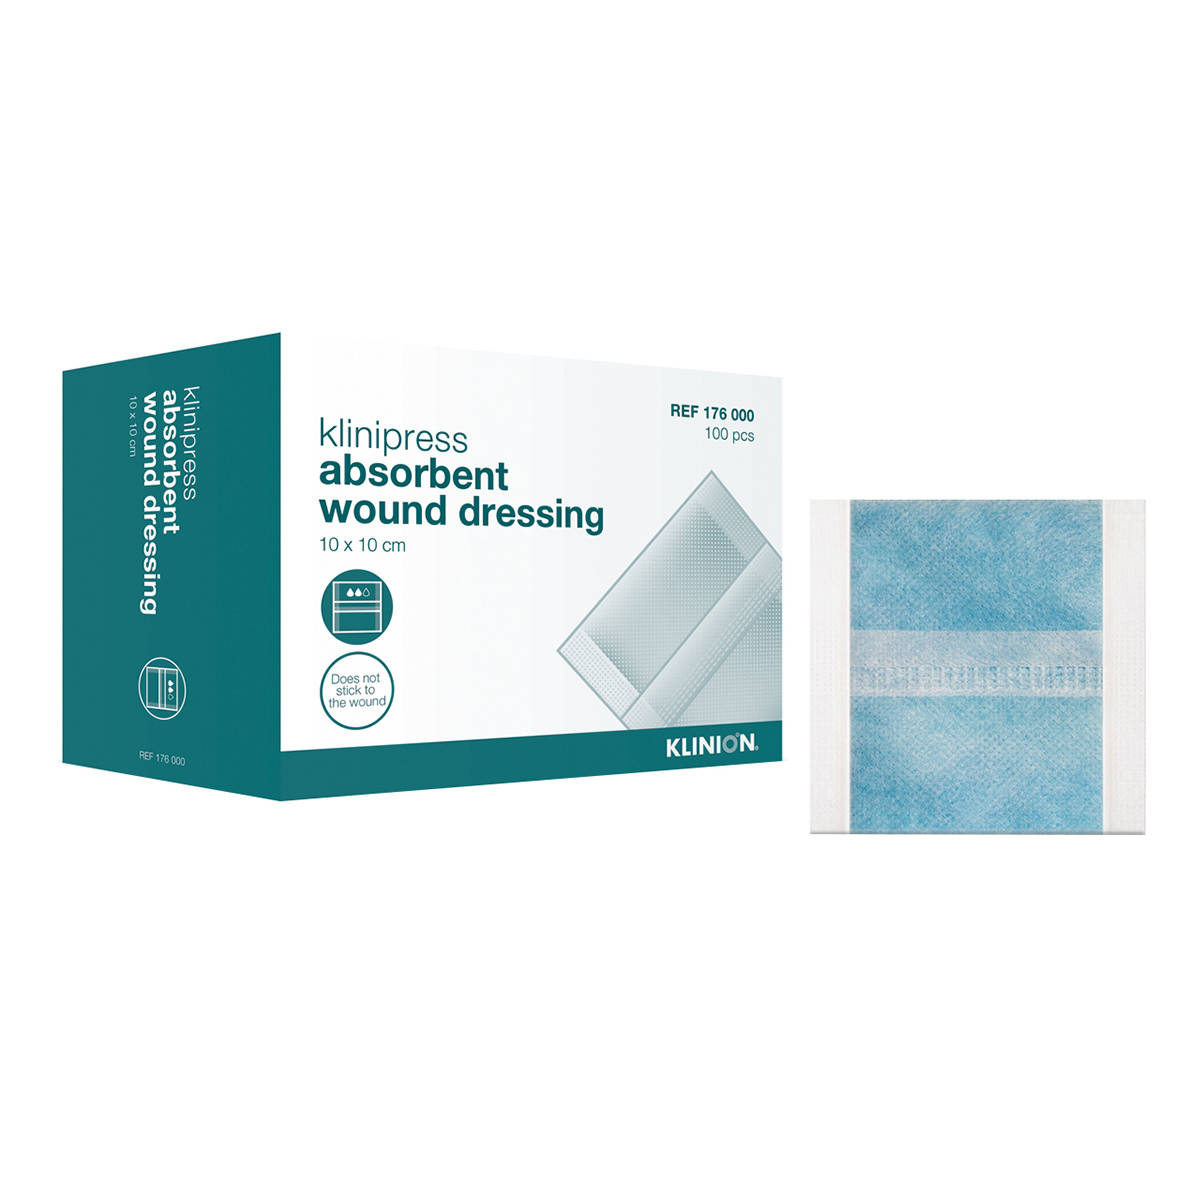 Absorbent wound dressing with box